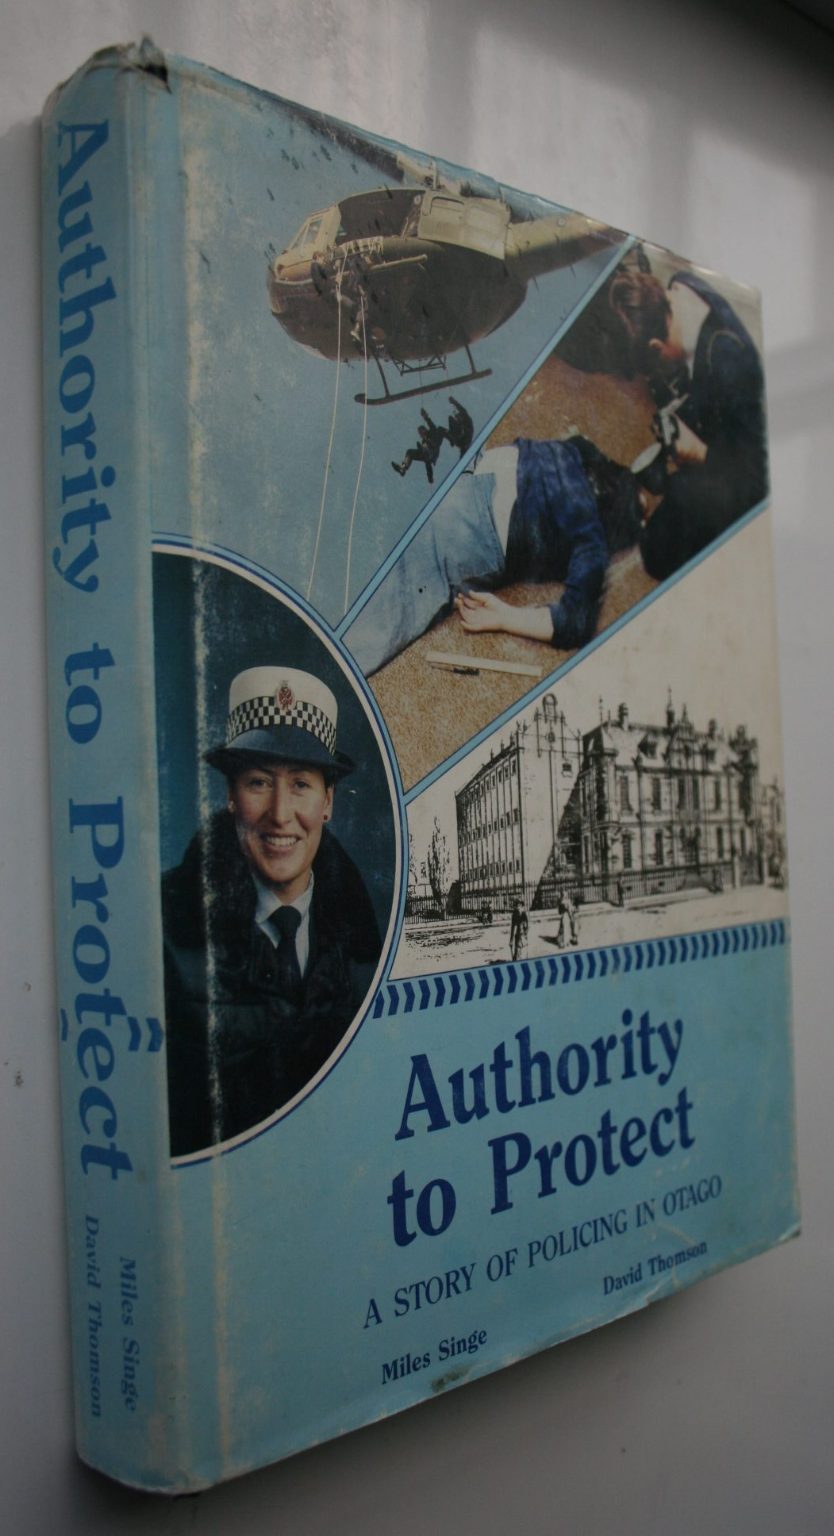 Authority to Protect: A Story of Policing in Otago by Miles Singe, David Thomson. SIGNED BY C LIND (Senior Sergeant Police Officer 1960 - 1999 )